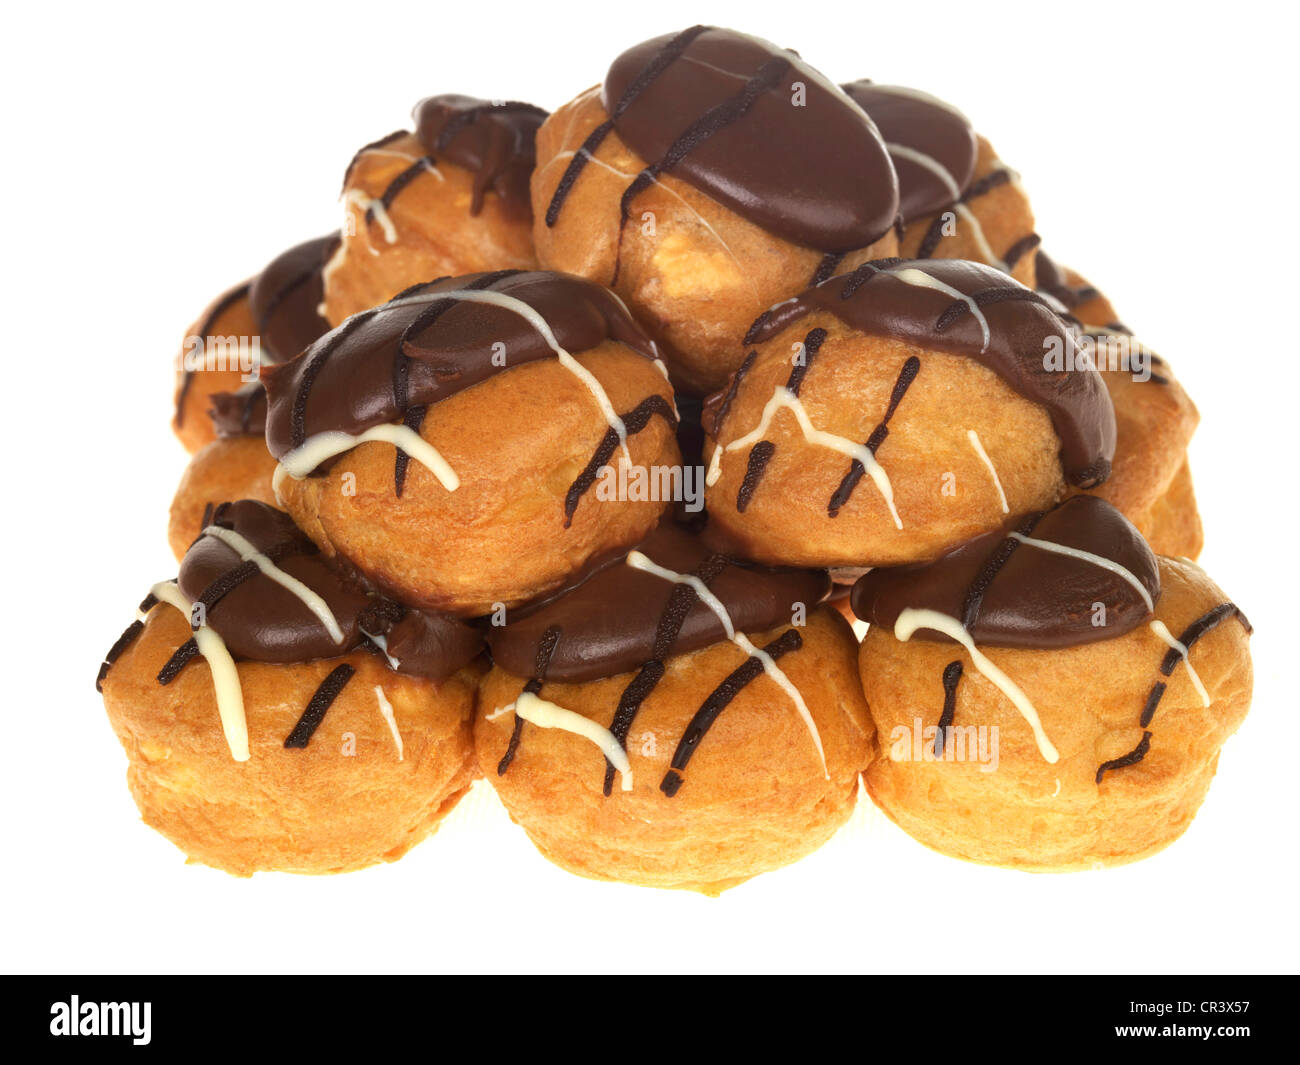 Delicious Luxury Baked Individual Chocolate Profiteroles Dessert, Isolated Against White Background, With Clipping Path And No People Stock Photo